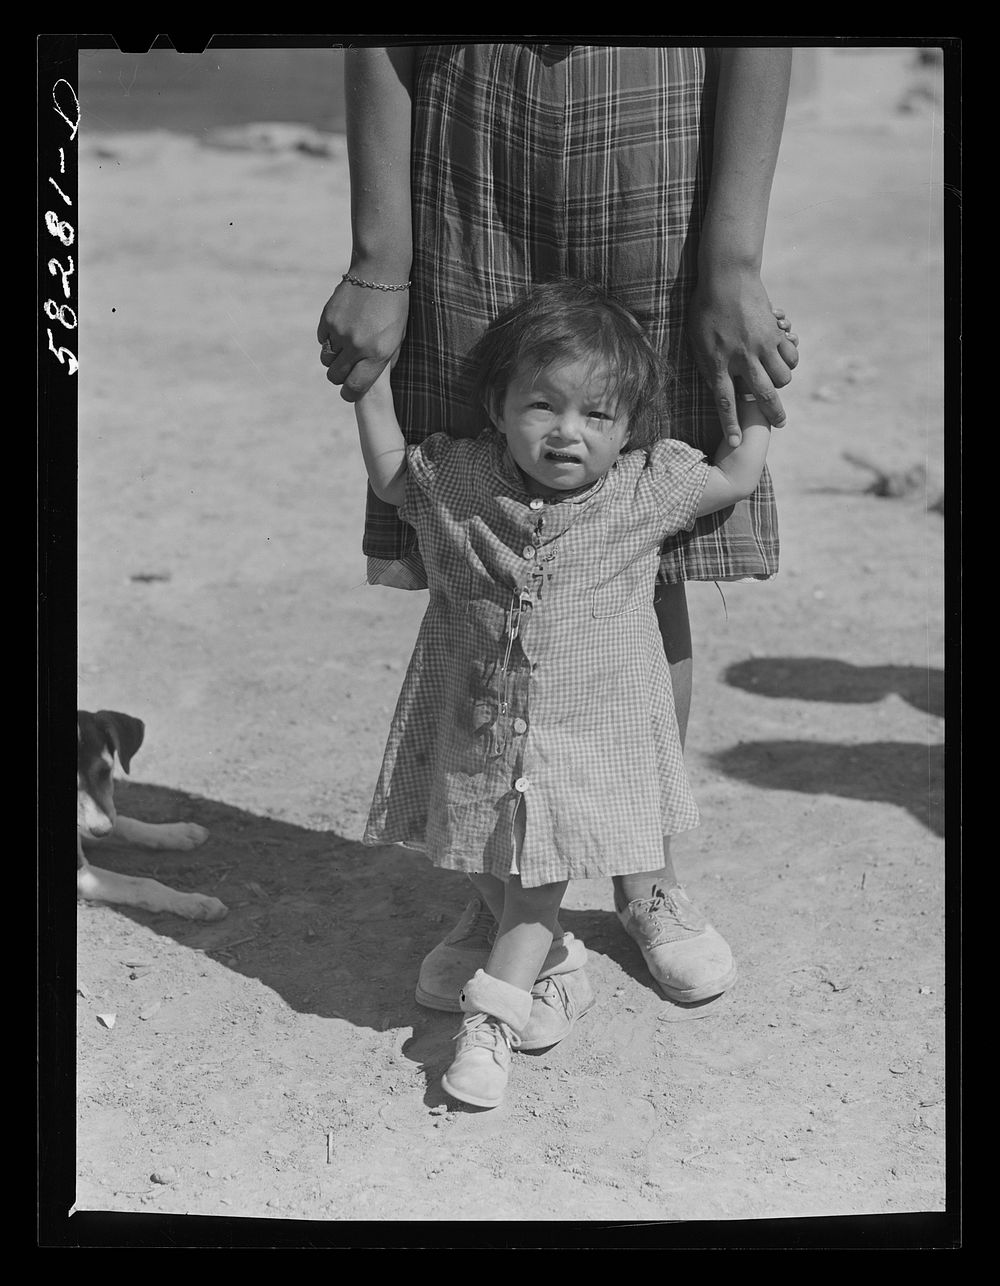 Cheyenne Indian child. Near Lame Deer, Montana. Sourced from the Library of Congress.